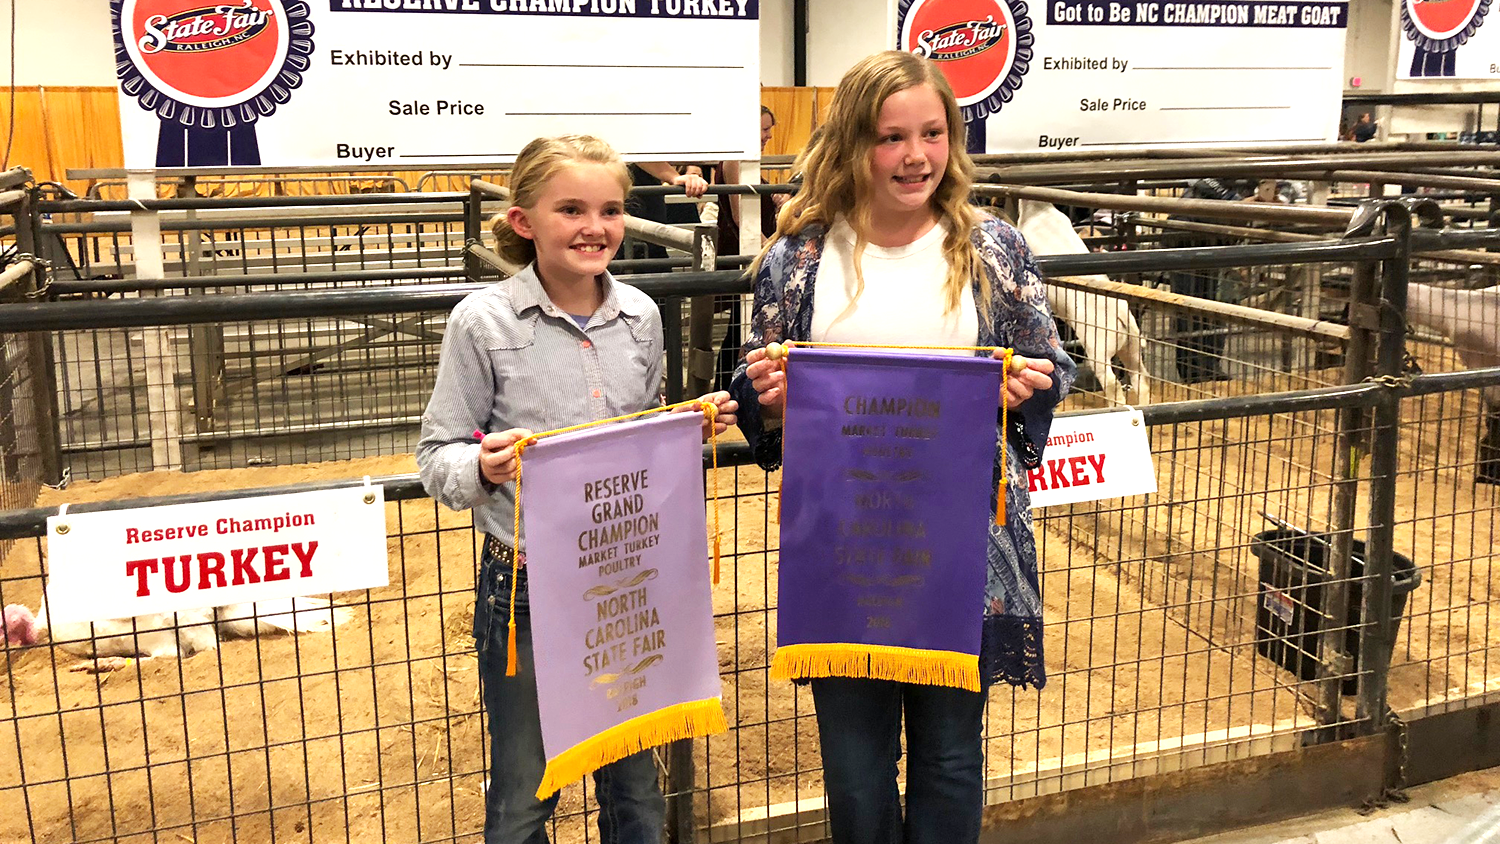 Caroline Scarlett and Laura Jessup holding champion banners